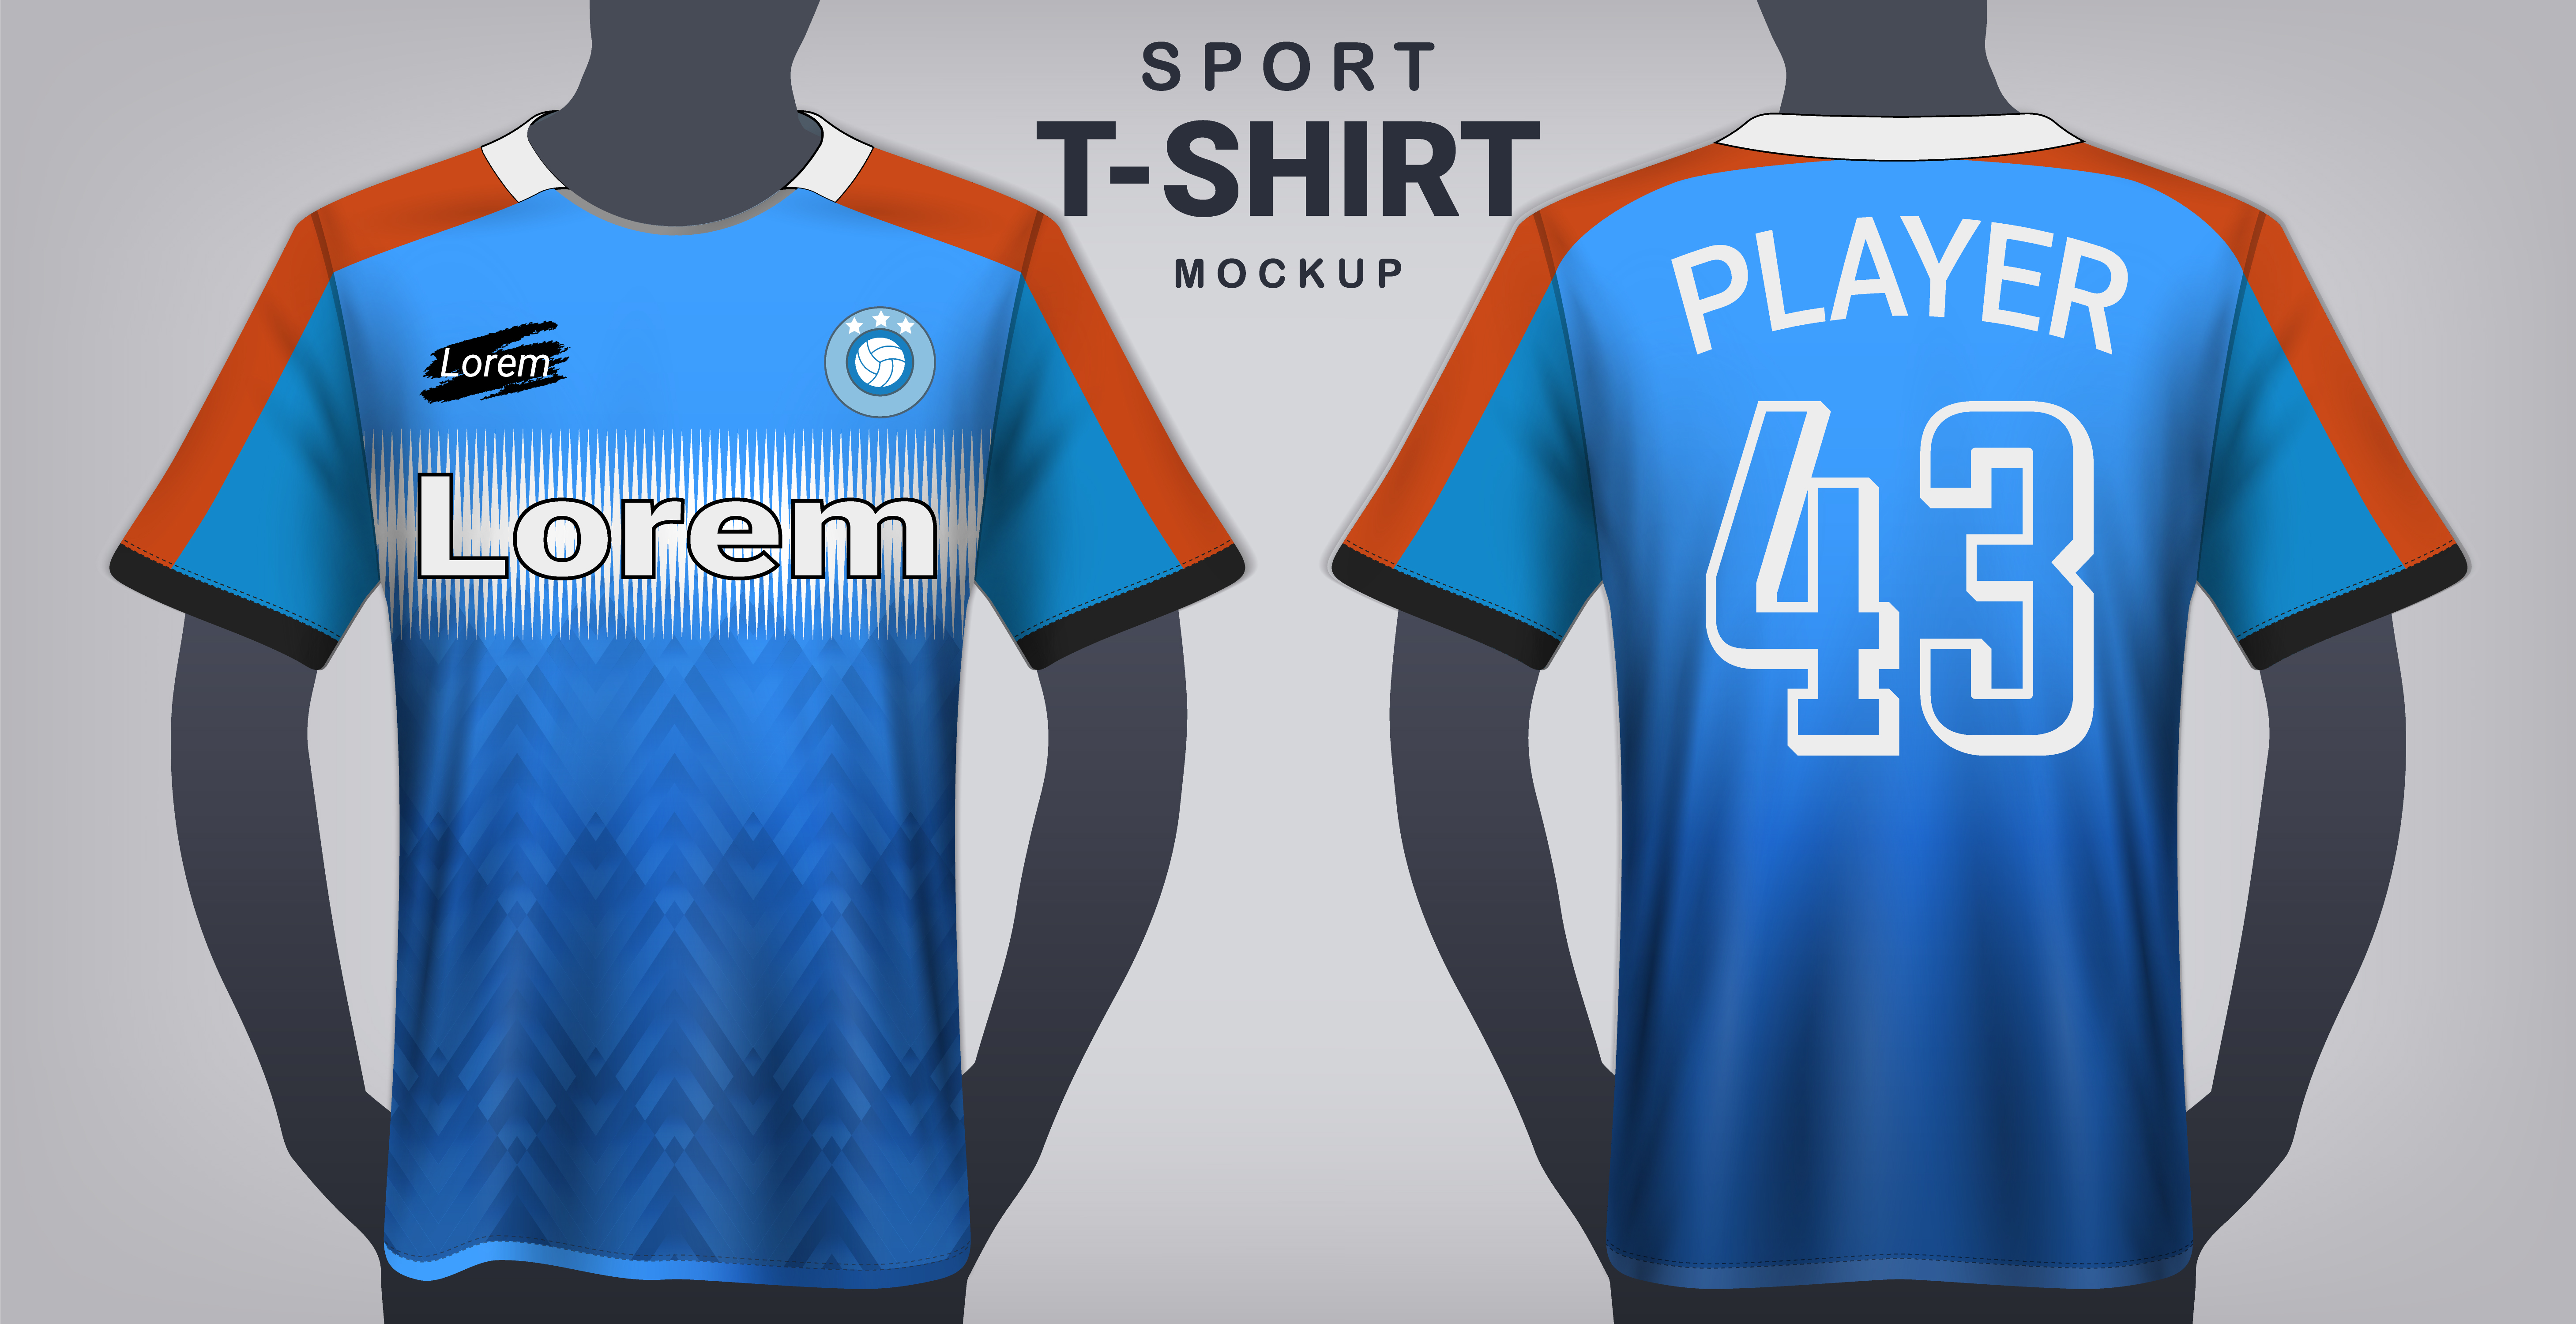 soccer-jersey-and-sport-t-shirt-mockup-template-realistic-graphic